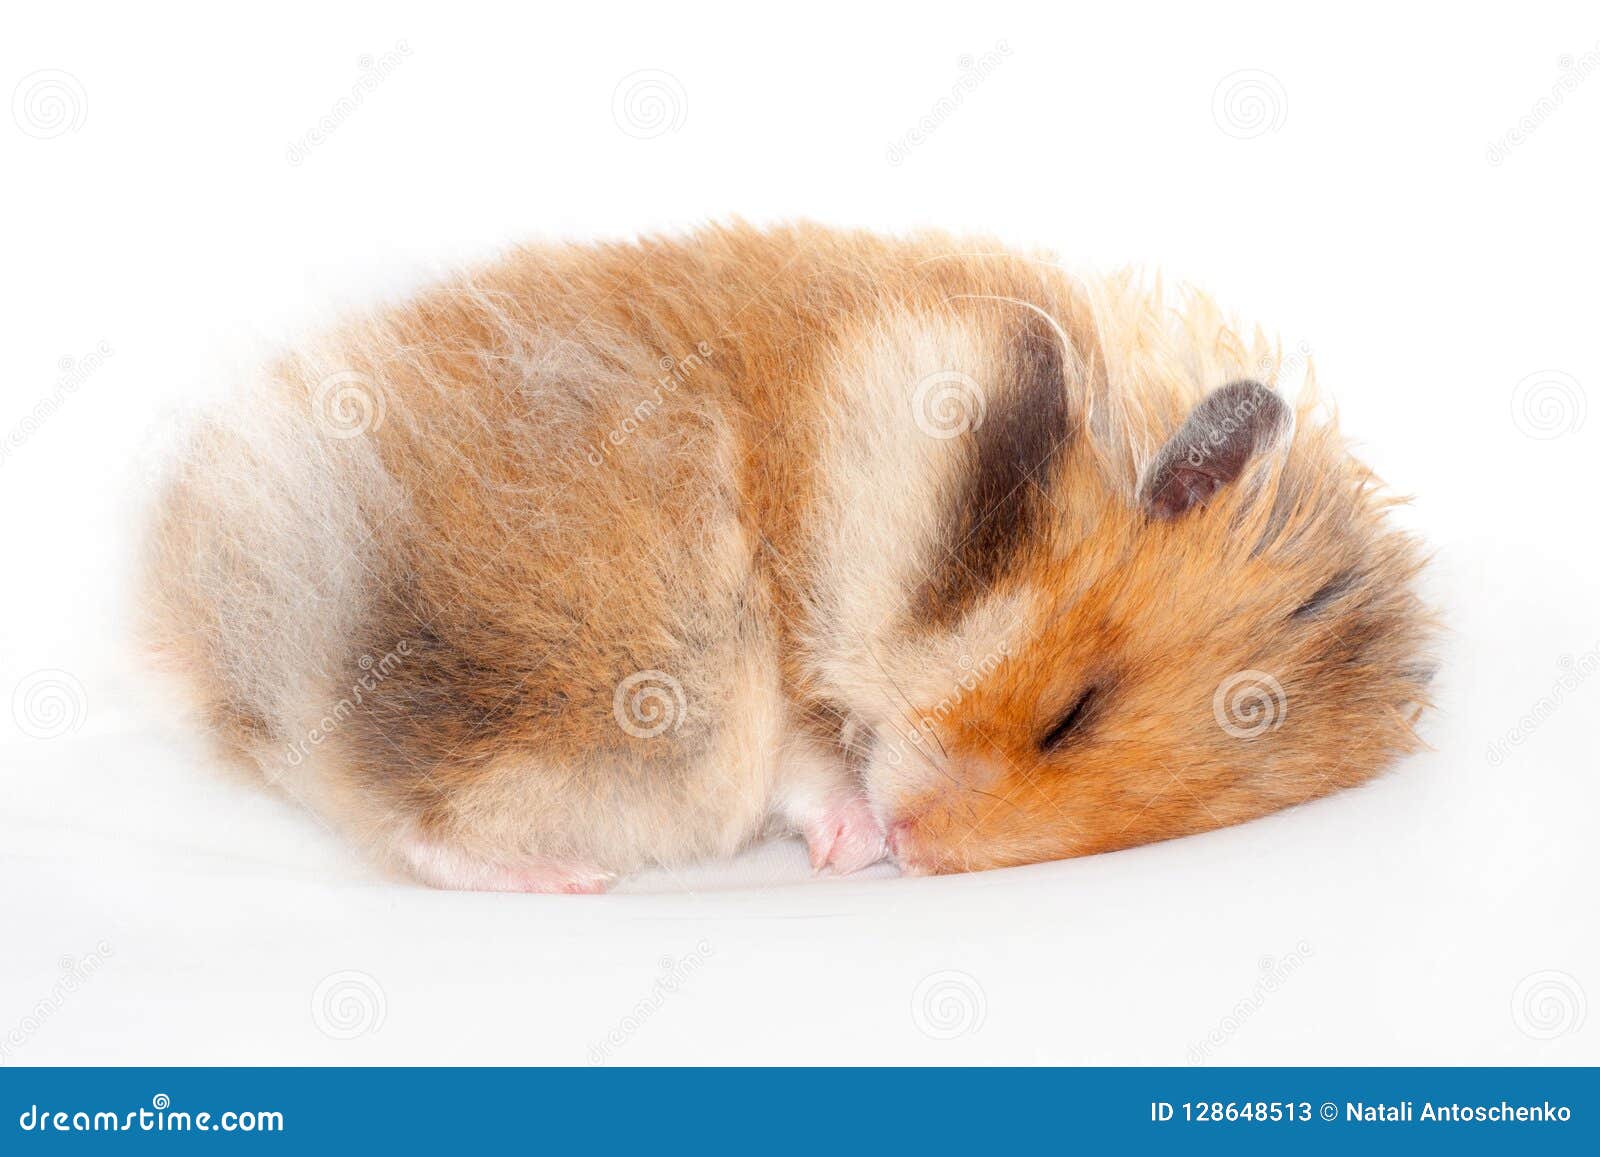 Cute Funny Syrian Fluffy Hamster Lies and Sleeps Stock Image - Image of  animal, forage: 128648513